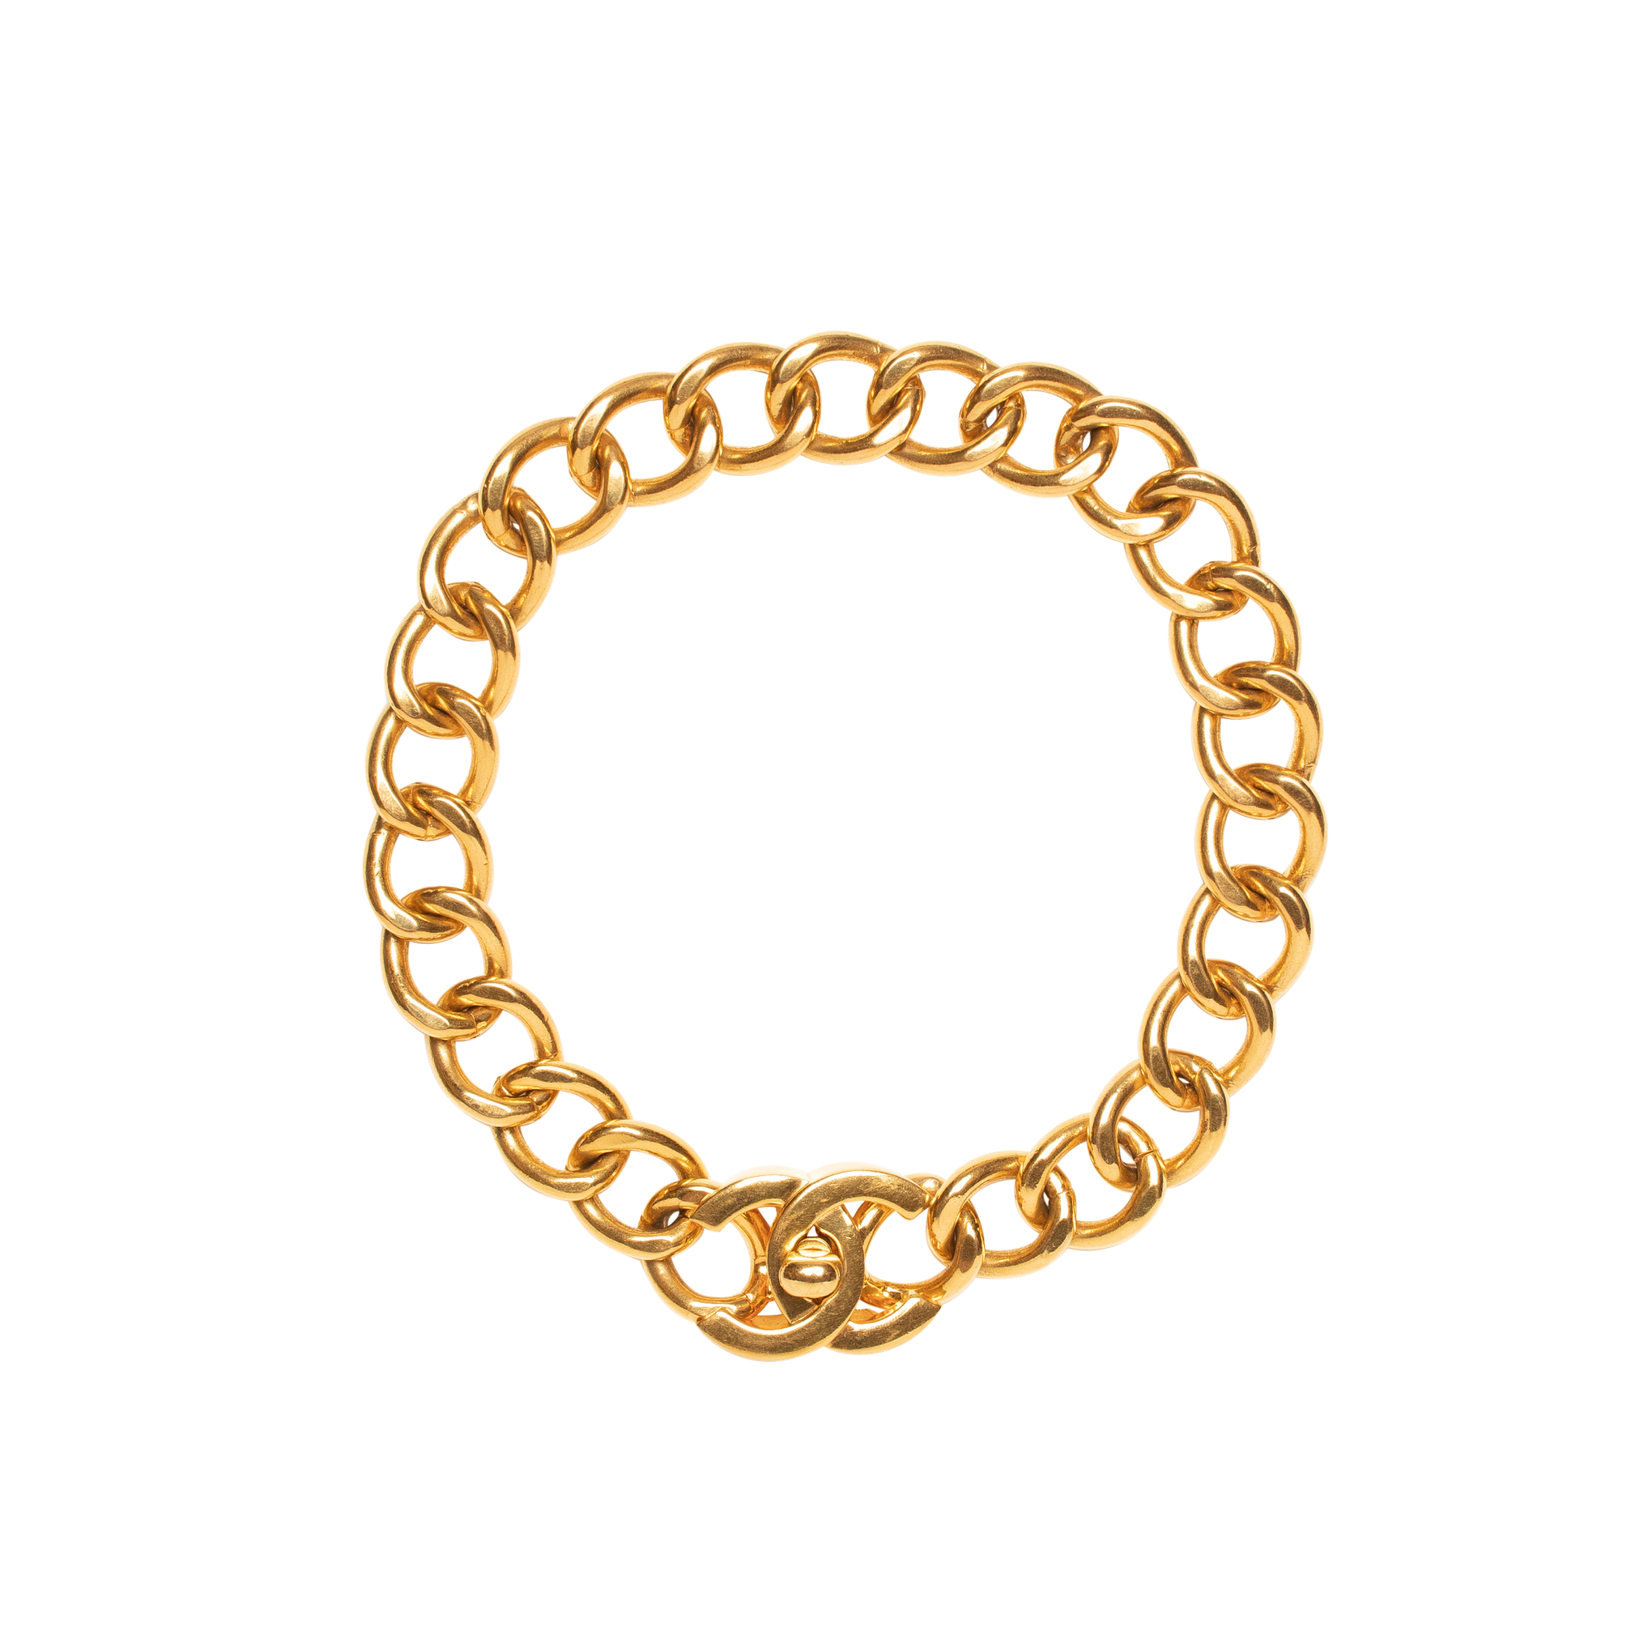 What Goes Around Comes Around Chanel Chunky Turnlock Necklace - Gold